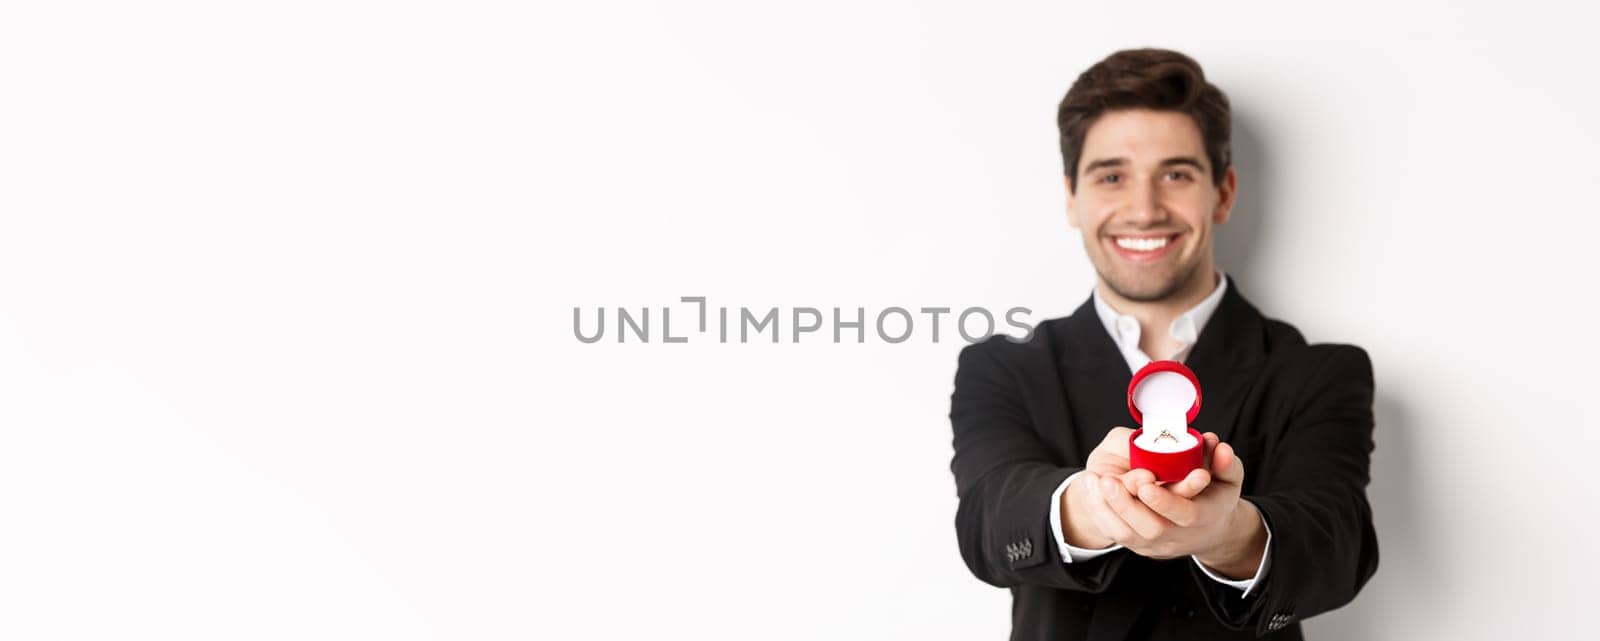 Image of handsome man looking romantic, giving you an engagement ring, making proposal to marry him, standing against white background.